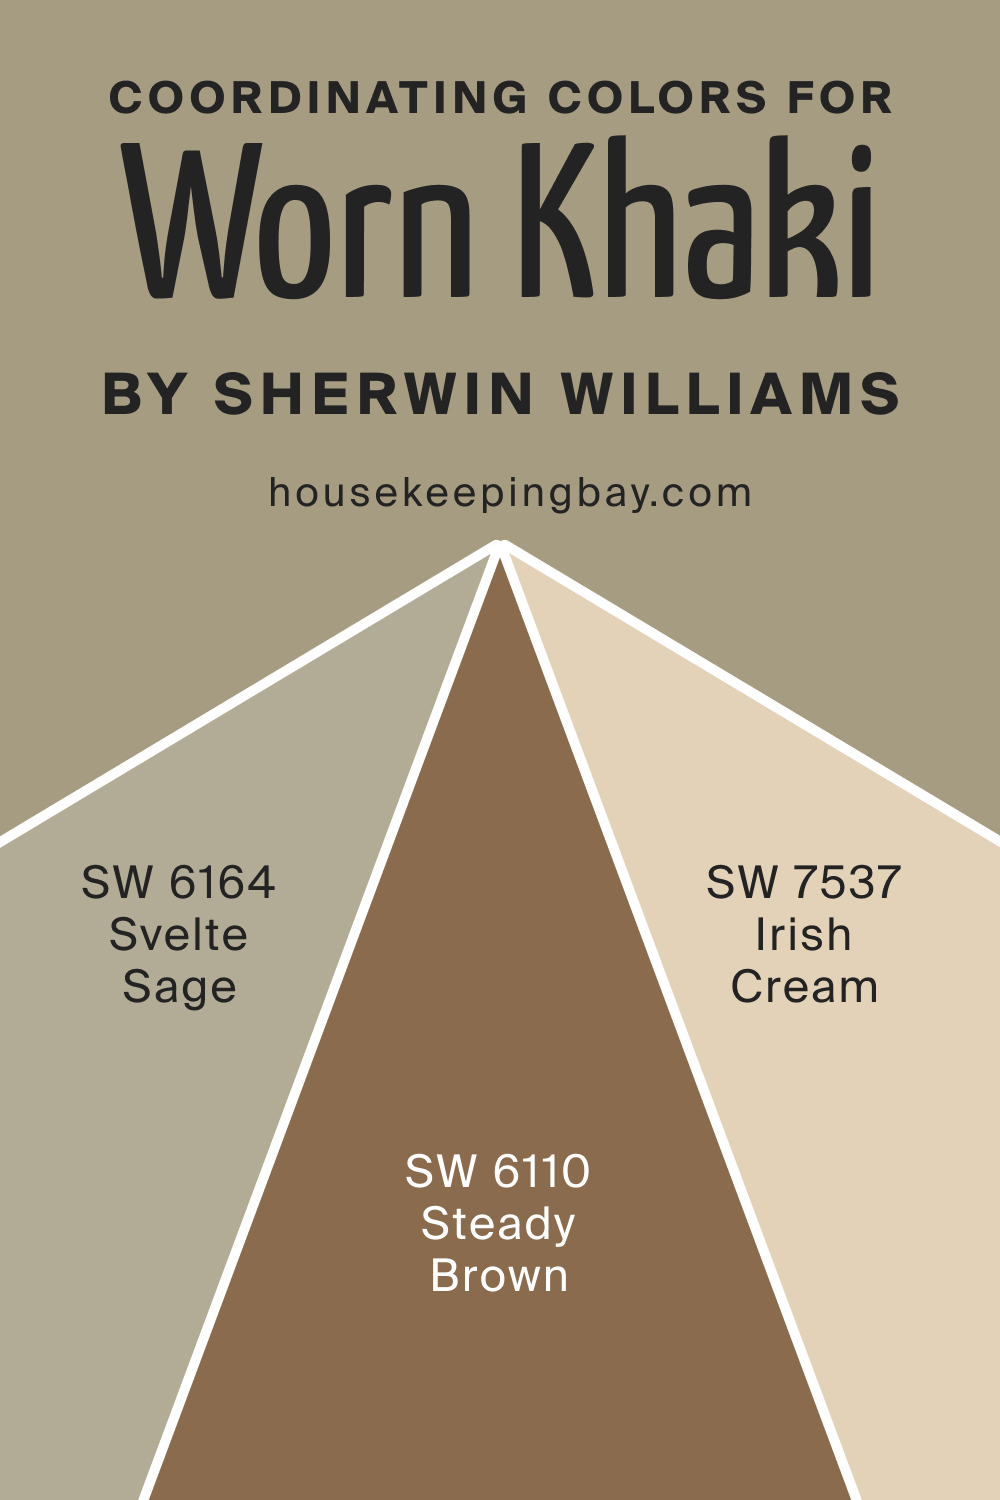 Coordinating Colors for SW 9527 Worn Khaki by Sherwin Williams